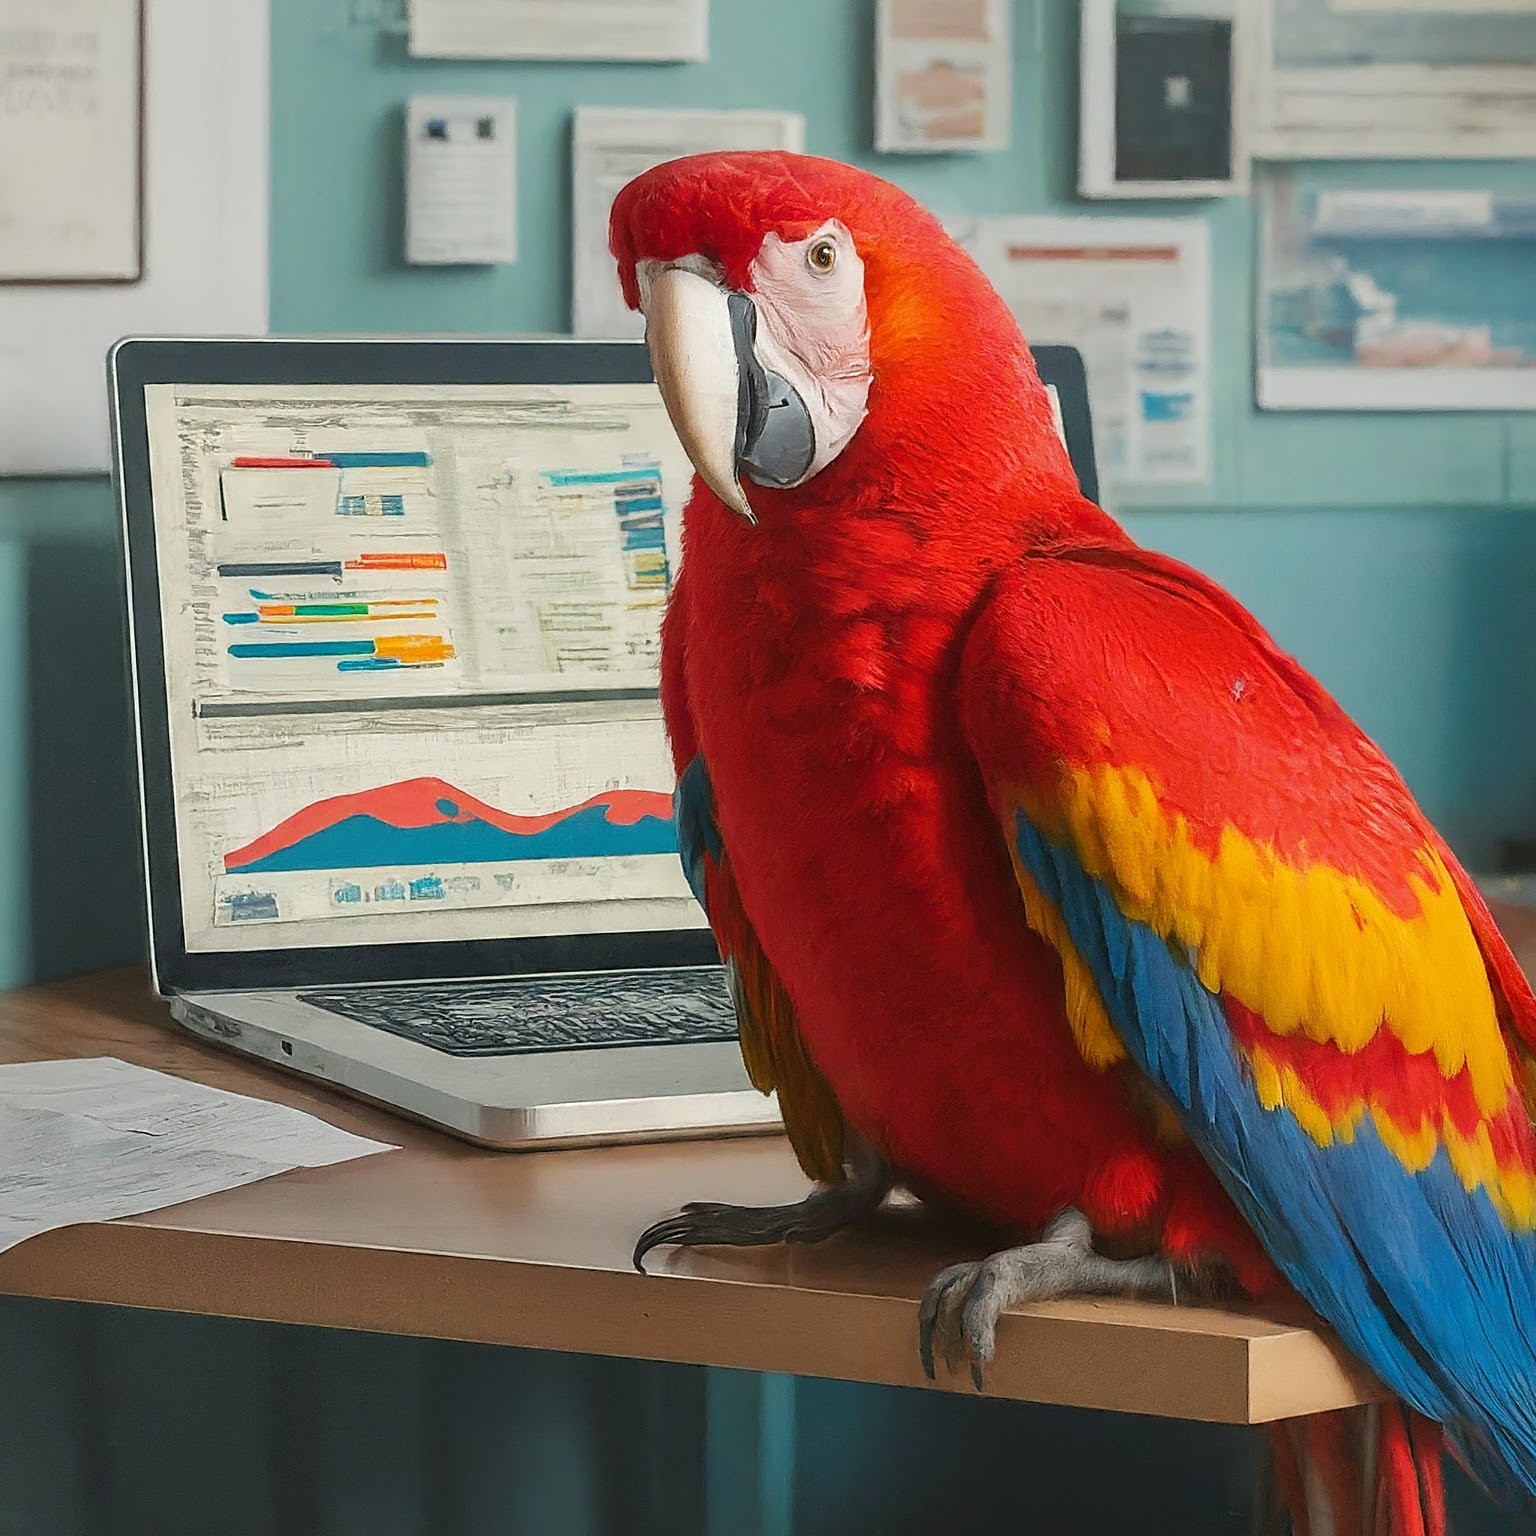 Red parrot doing Data Science work